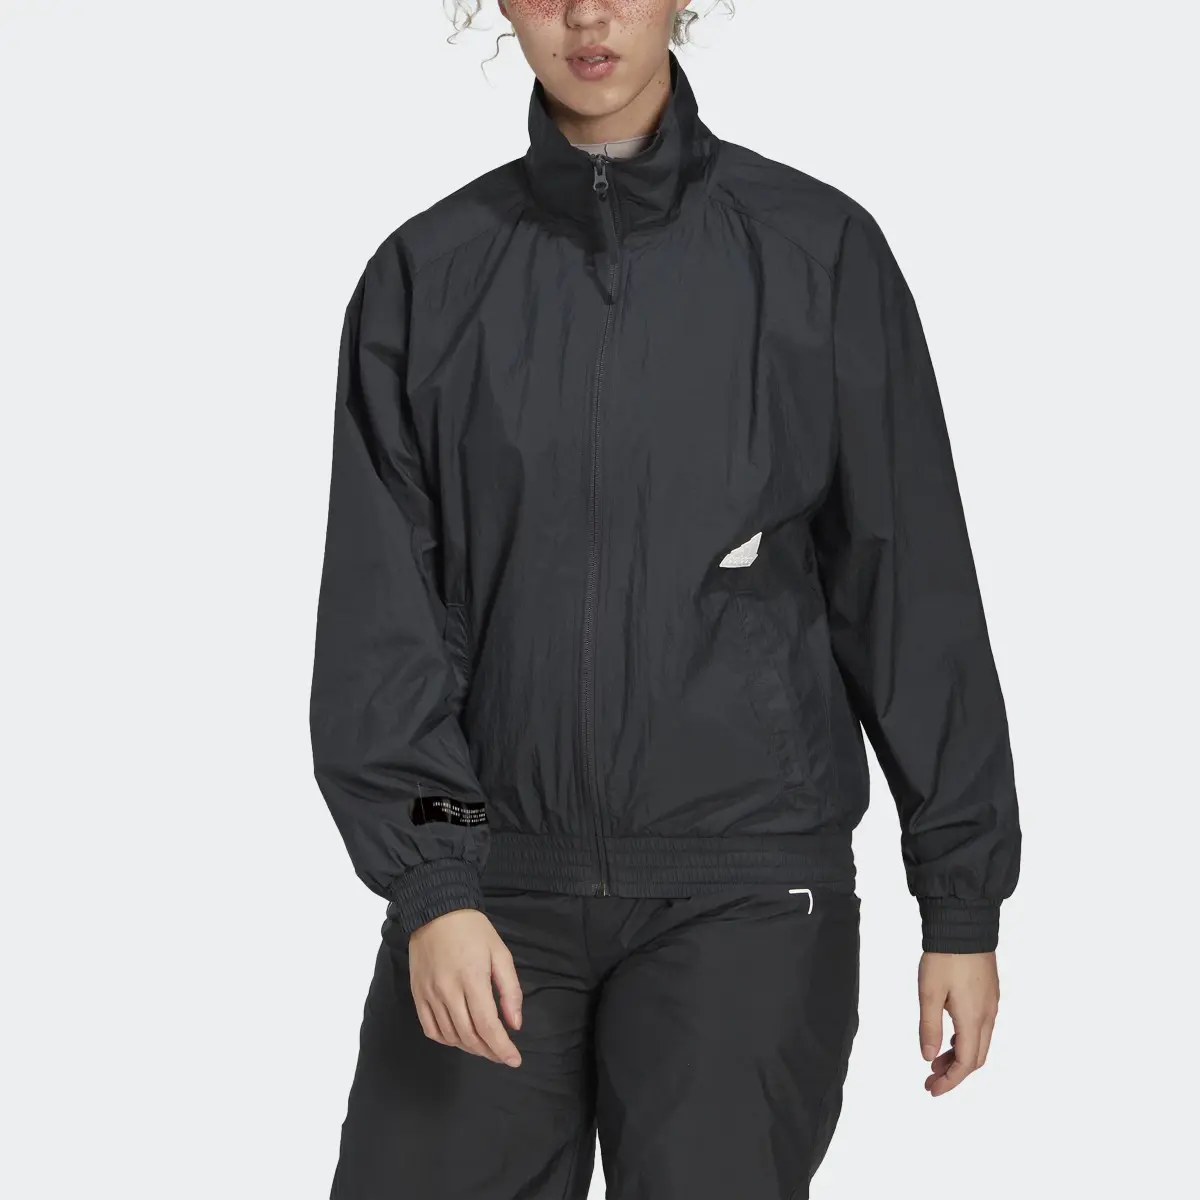 Adidas Woven Track Top. 1